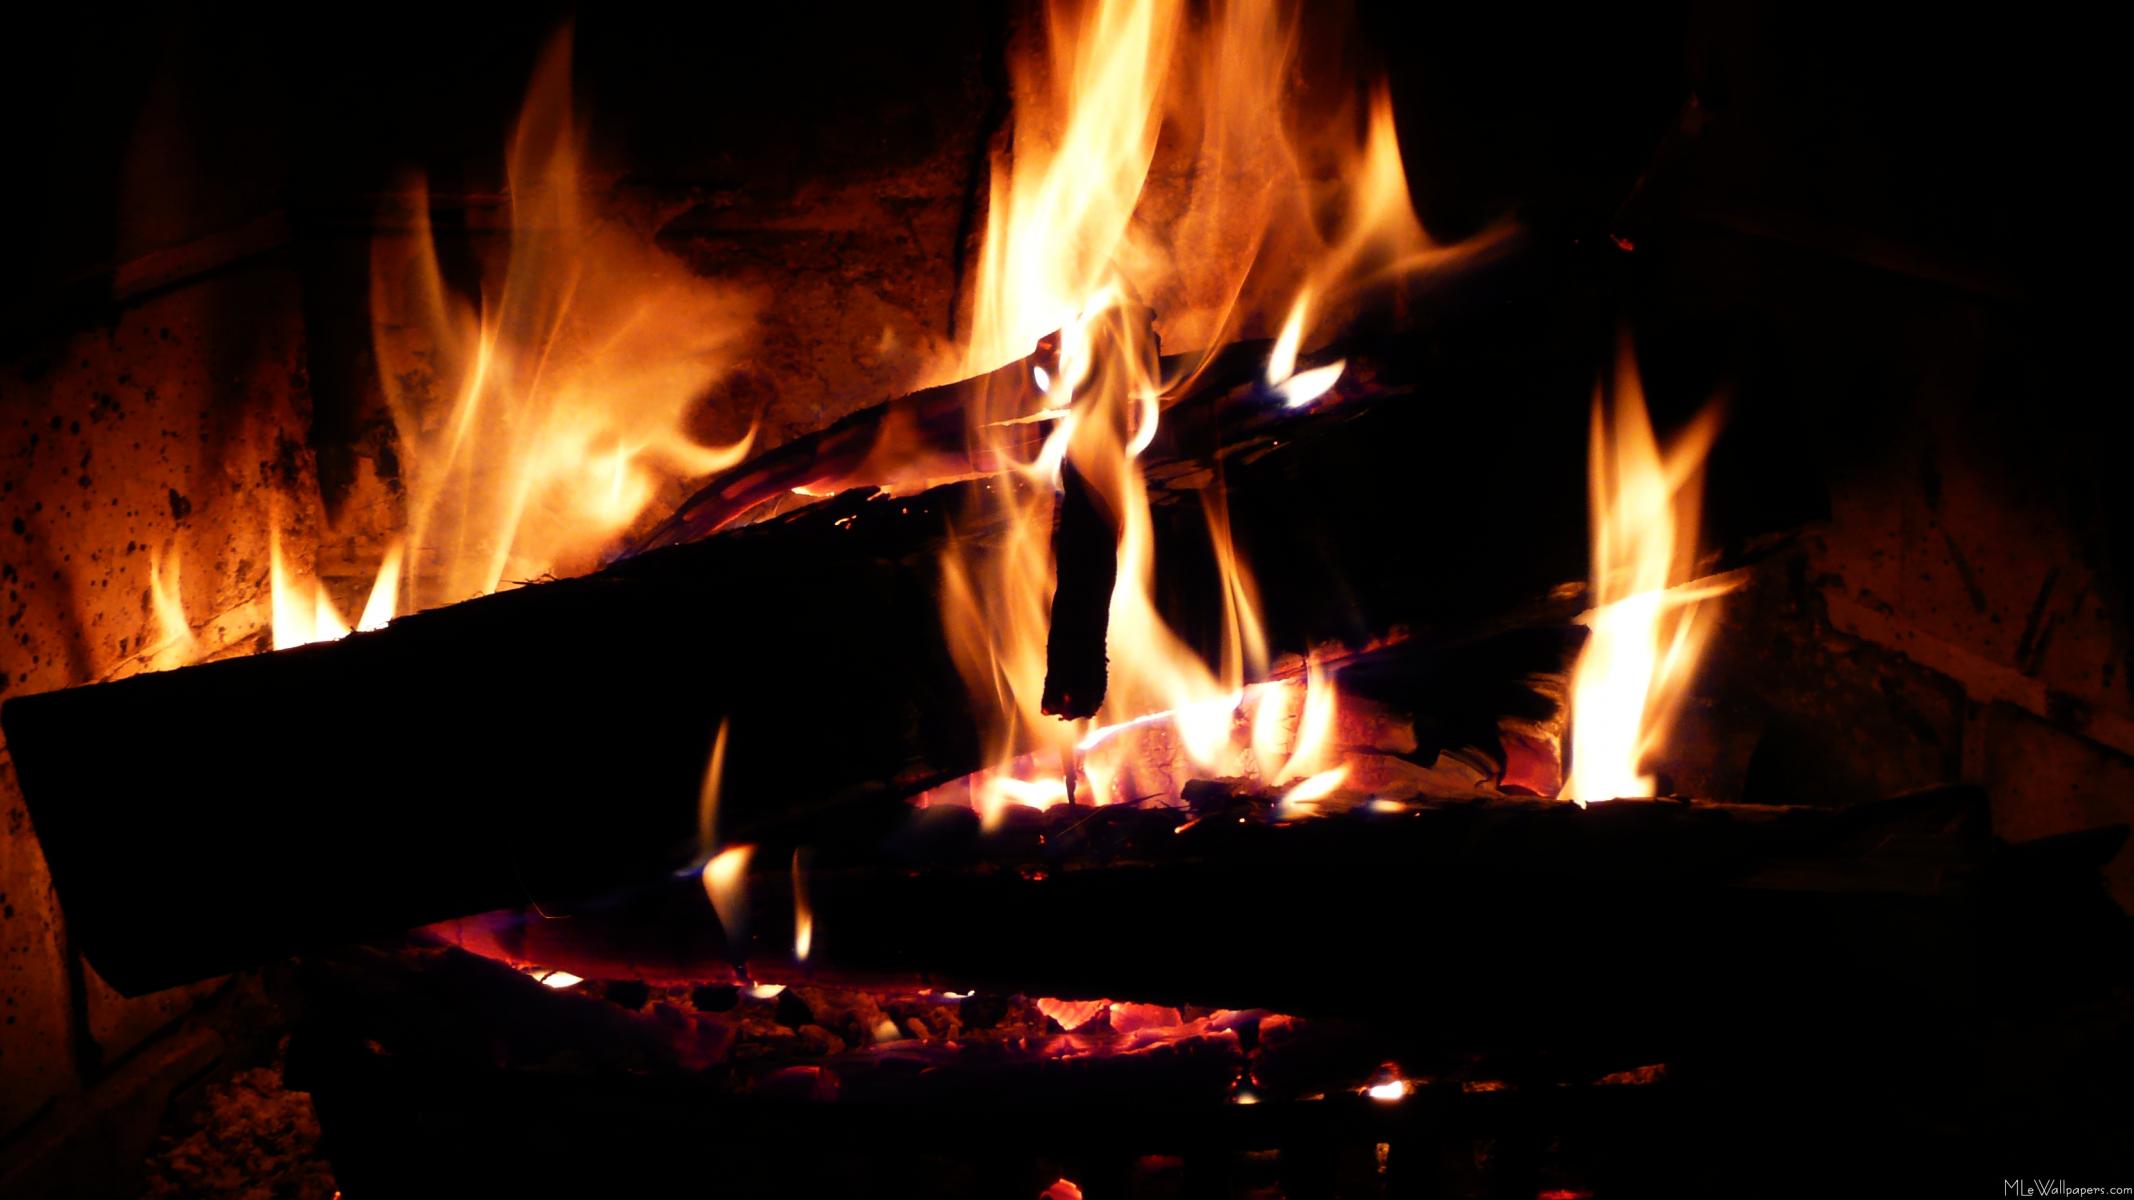 Fireplace Live HD Screensaver for apple download free